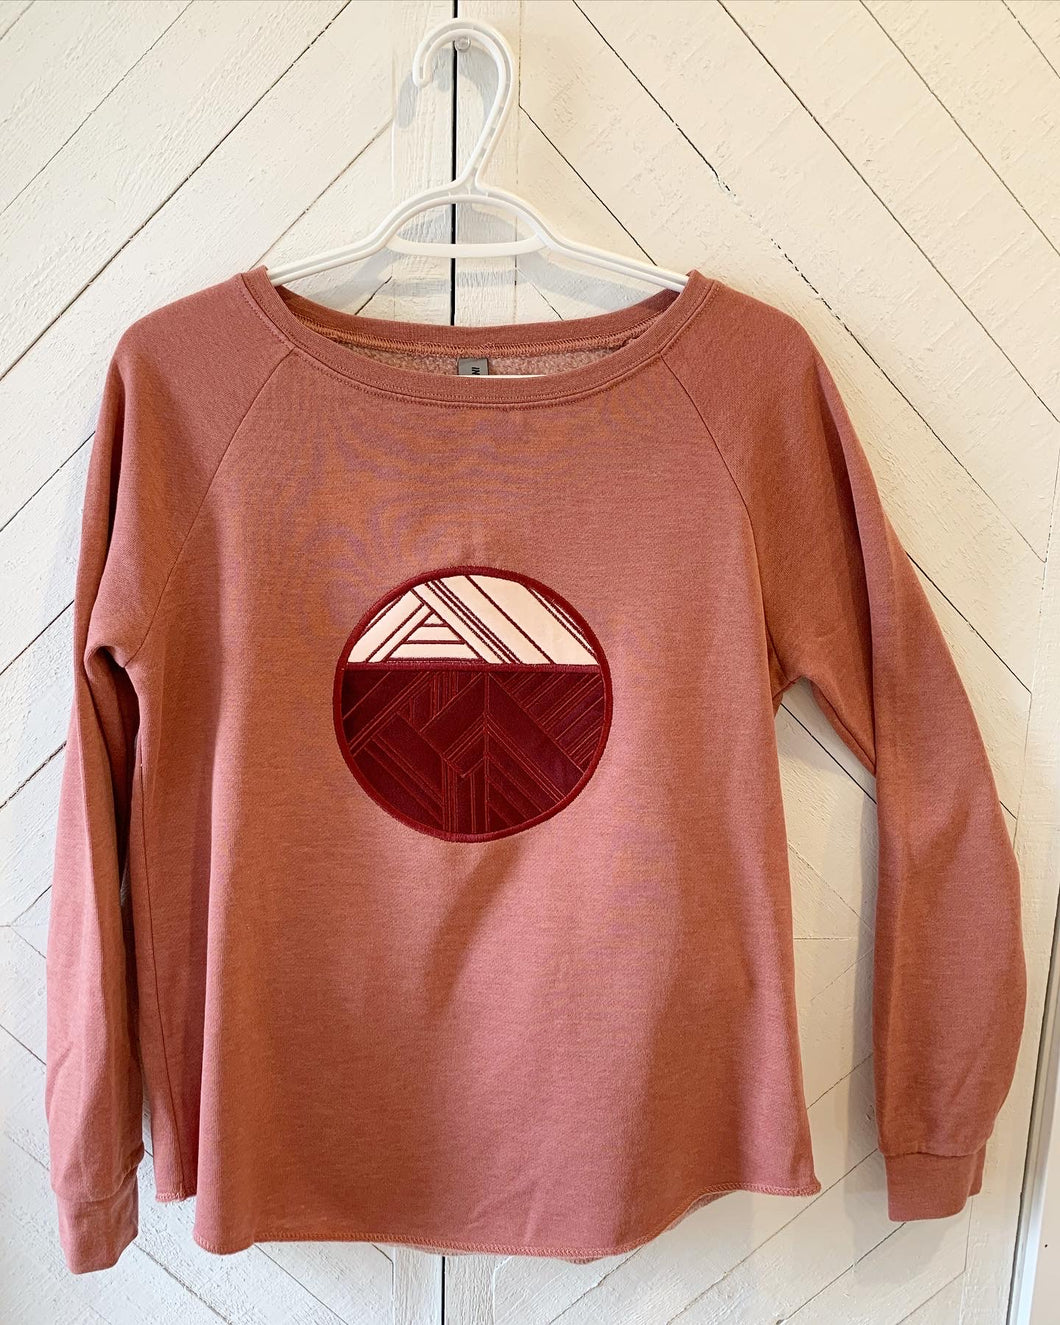 Spring sweater - Pink Trimscape Logo